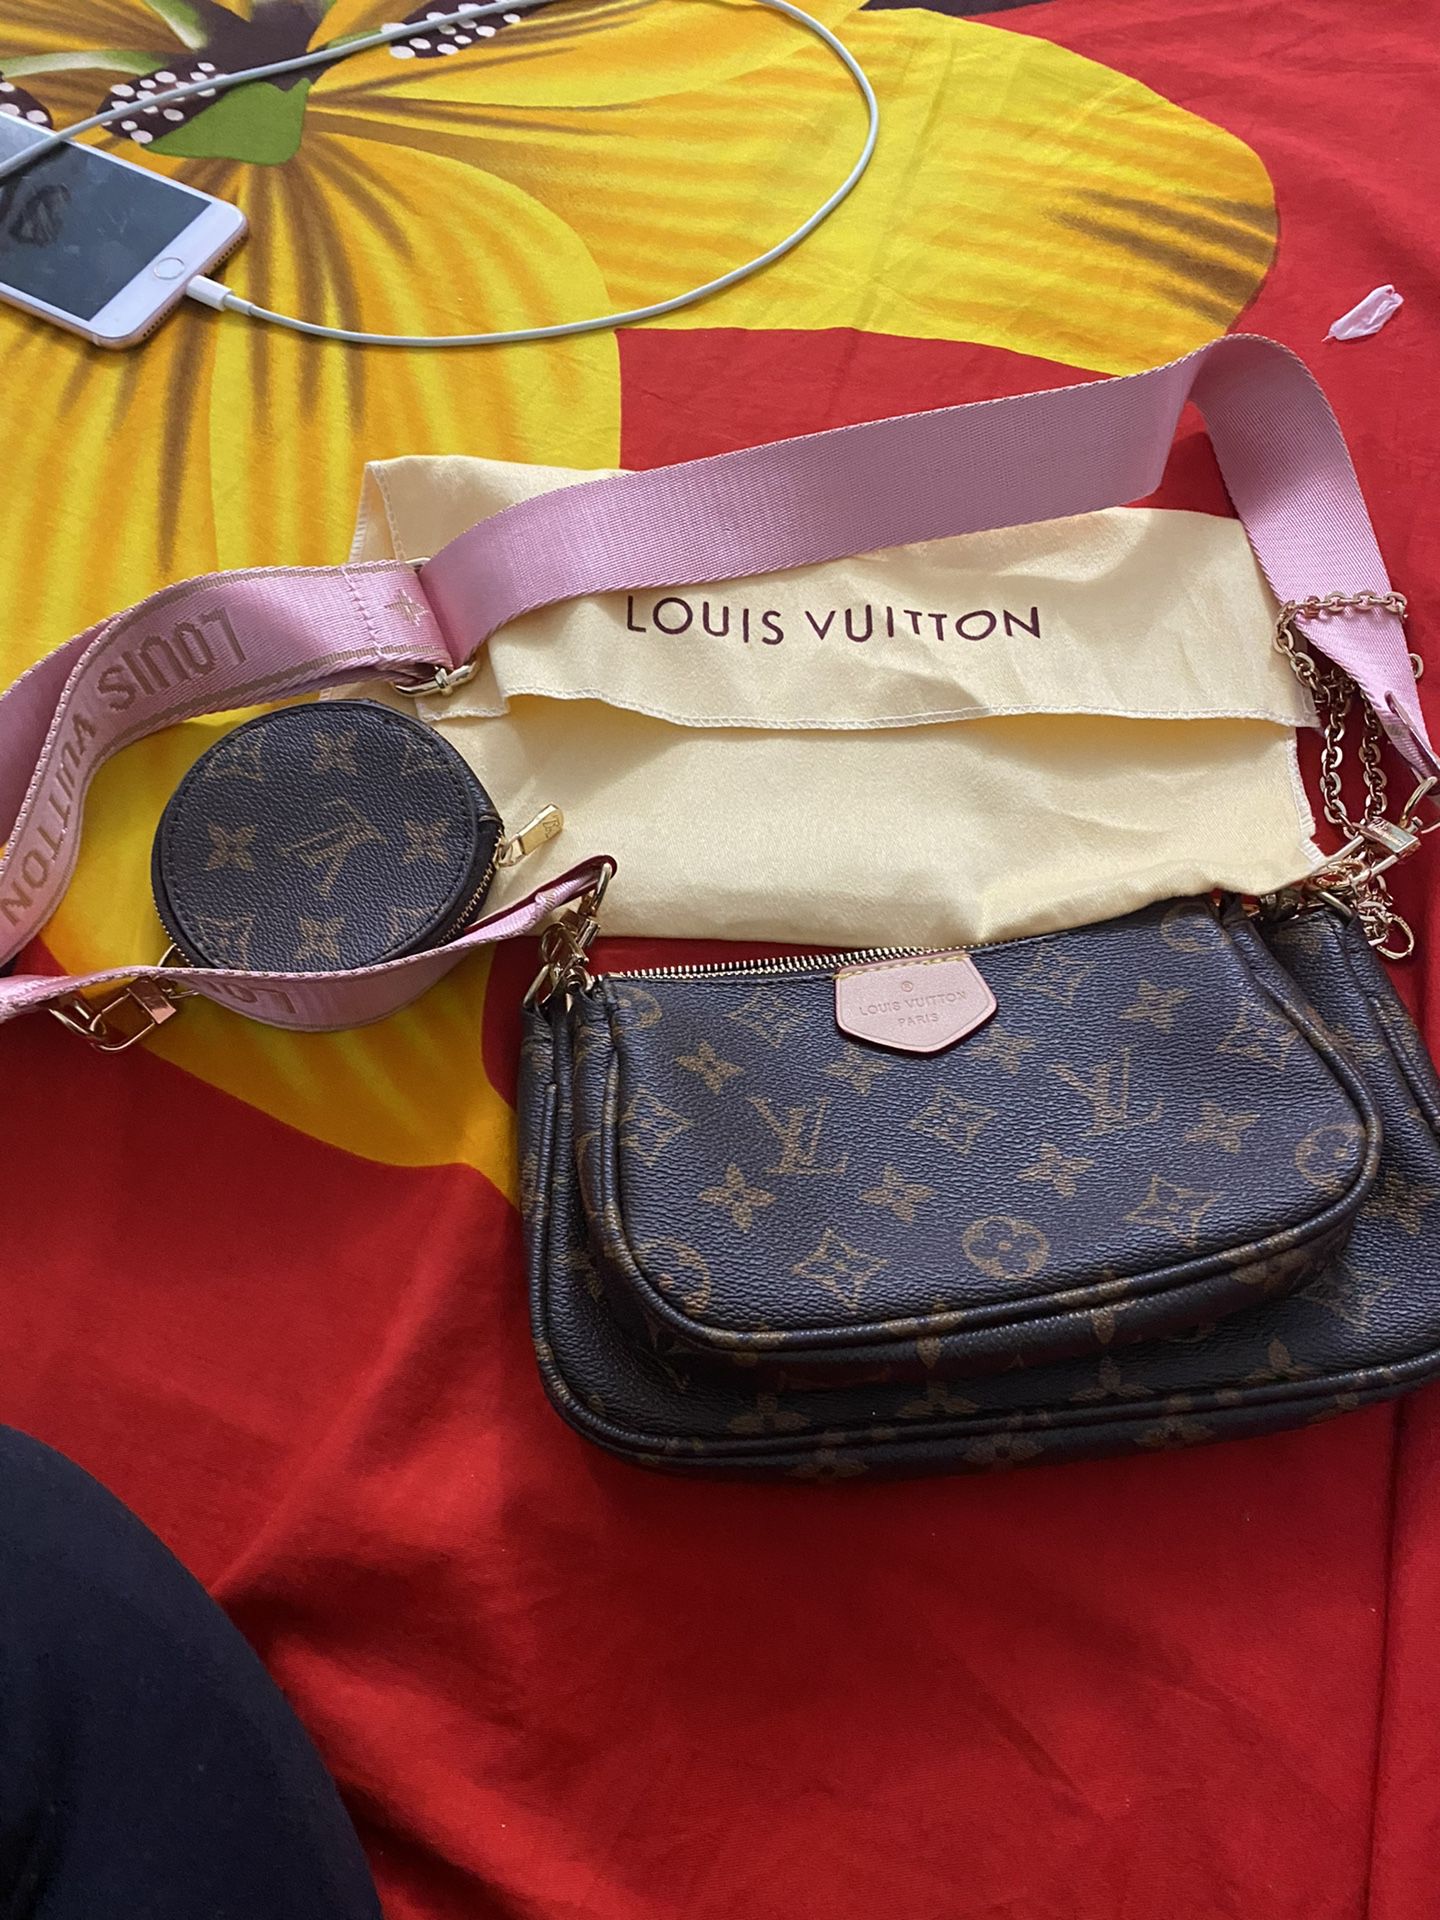 Louis Vuitton Bag for Sale in Brooklyn, NY - OfferUp